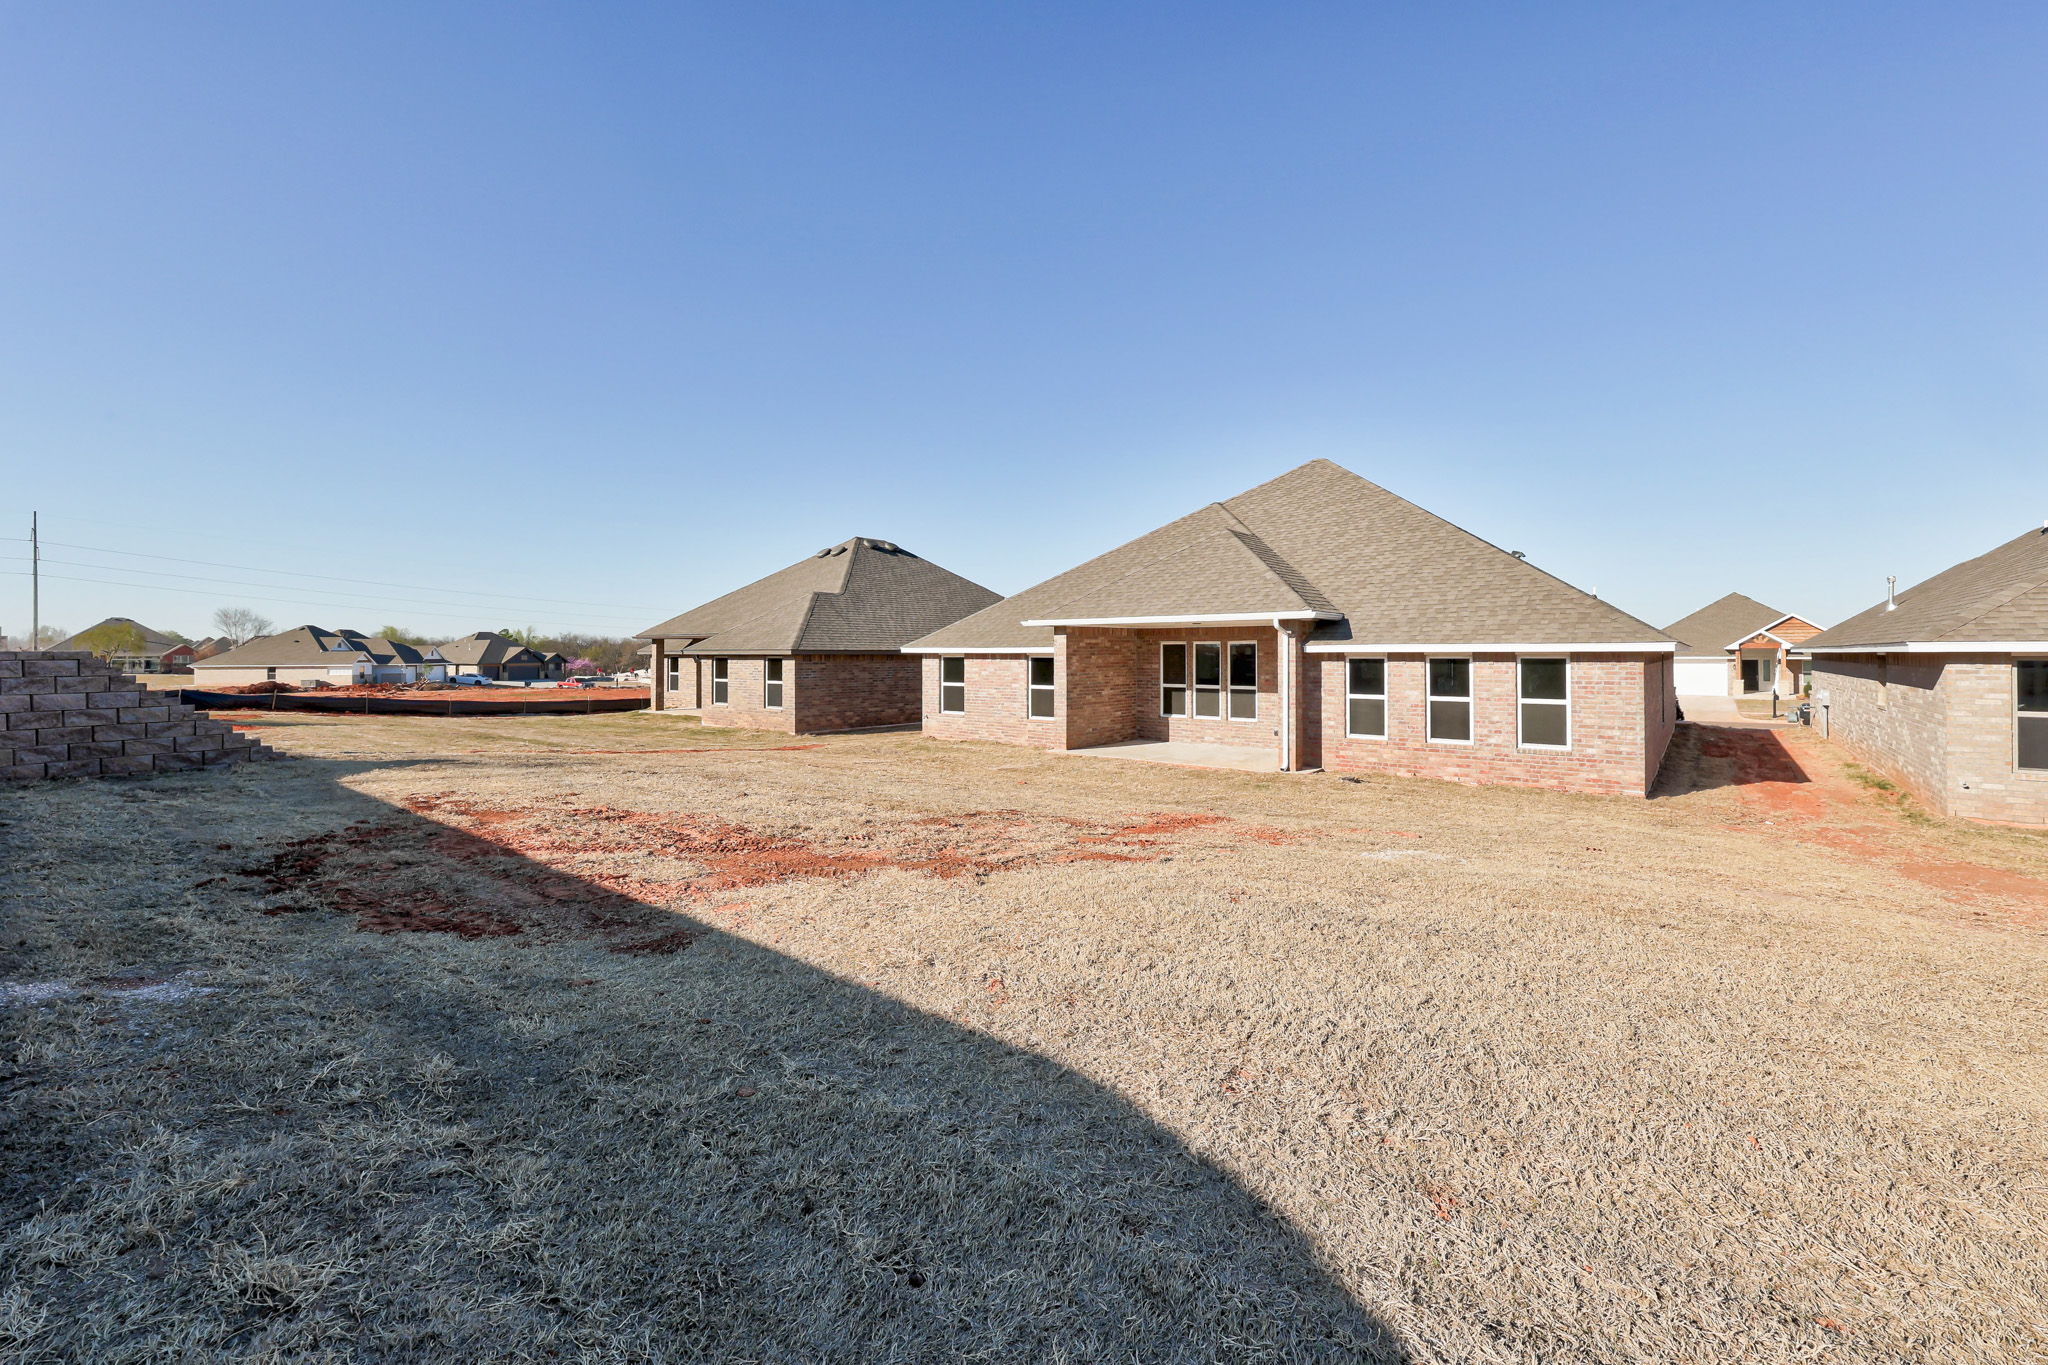 2412 Creekview Trail, Moore, Oklahoma 73160, 4 Bedrooms Bedrooms, ,2 BathroomsBathrooms,House,For Sale,Creekview Trail,1456